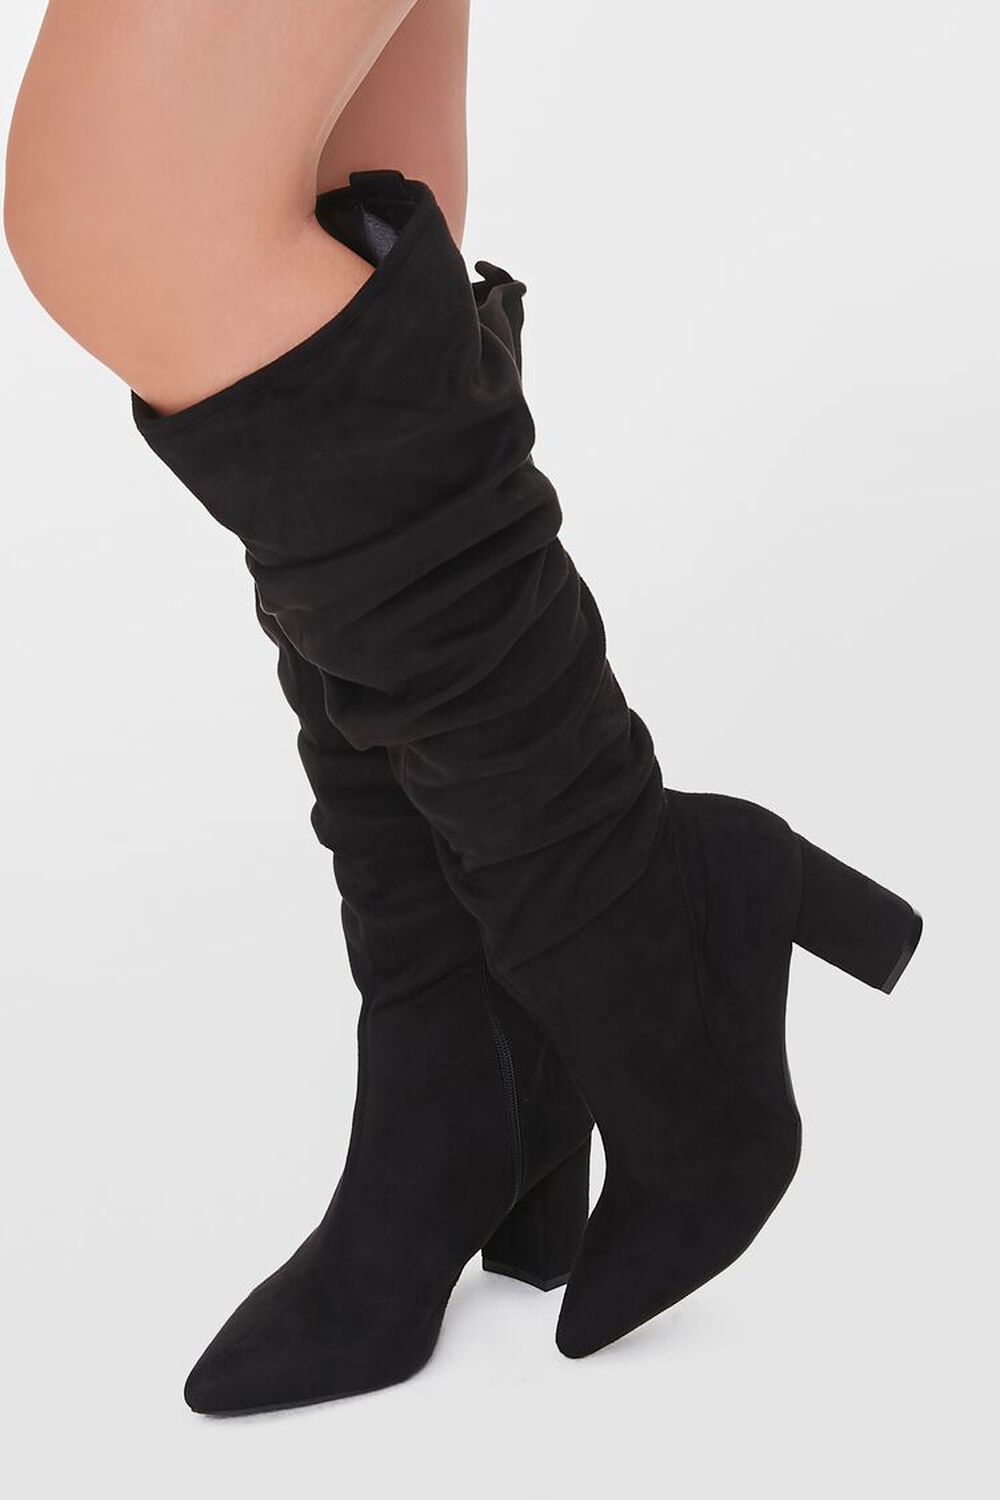 BLACK Faux Suede Slouch Boots, image 1